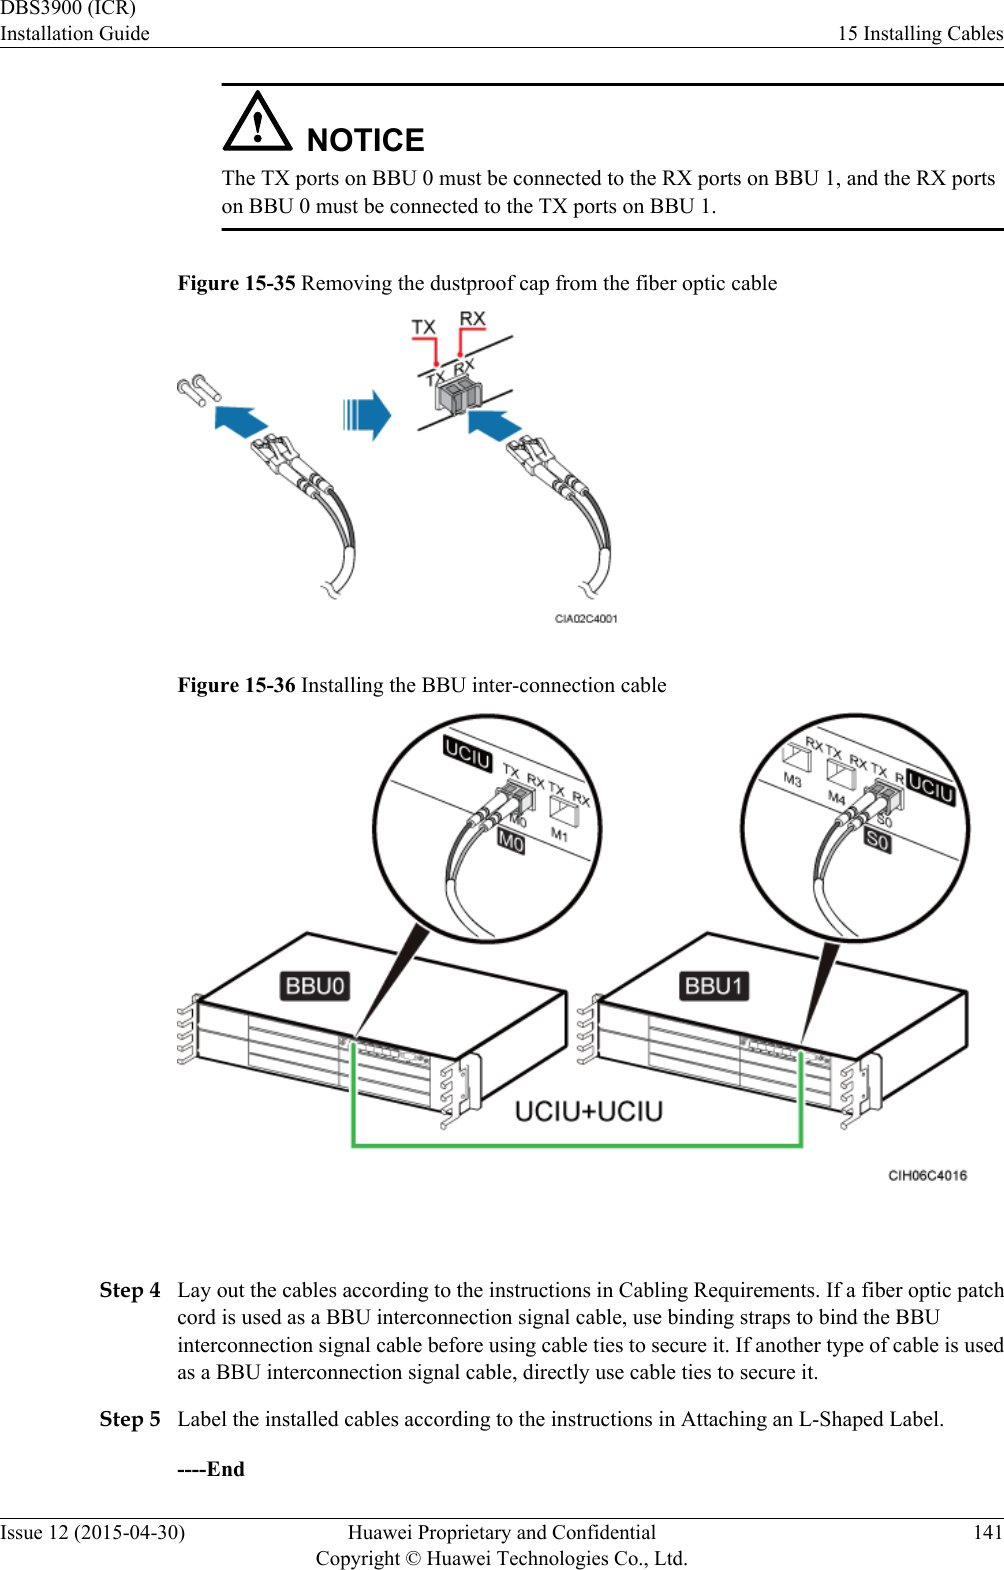 NOTICEThe TX ports on BBU 0 must be connected to the RX ports on BBU 1, and the RX portson BBU 0 must be connected to the TX ports on BBU 1.Figure 15-35 Removing the dustproof cap from the fiber optic cableFigure 15-36 Installing the BBU inter-connection cable Step 4 Lay out the cables according to the instructions in Cabling Requirements. If a fiber optic patchcord is used as a BBU interconnection signal cable, use binding straps to bind the BBUinterconnection signal cable before using cable ties to secure it. If another type of cable is usedas a BBU interconnection signal cable, directly use cable ties to secure it.Step 5 Label the installed cables according to the instructions in Attaching an L-Shaped Label.----EndDBS3900 (ICR)Installation Guide 15 Installing CablesIssue 12 (2015-04-30) Huawei Proprietary and ConfidentialCopyright © Huawei Technologies Co., Ltd.141